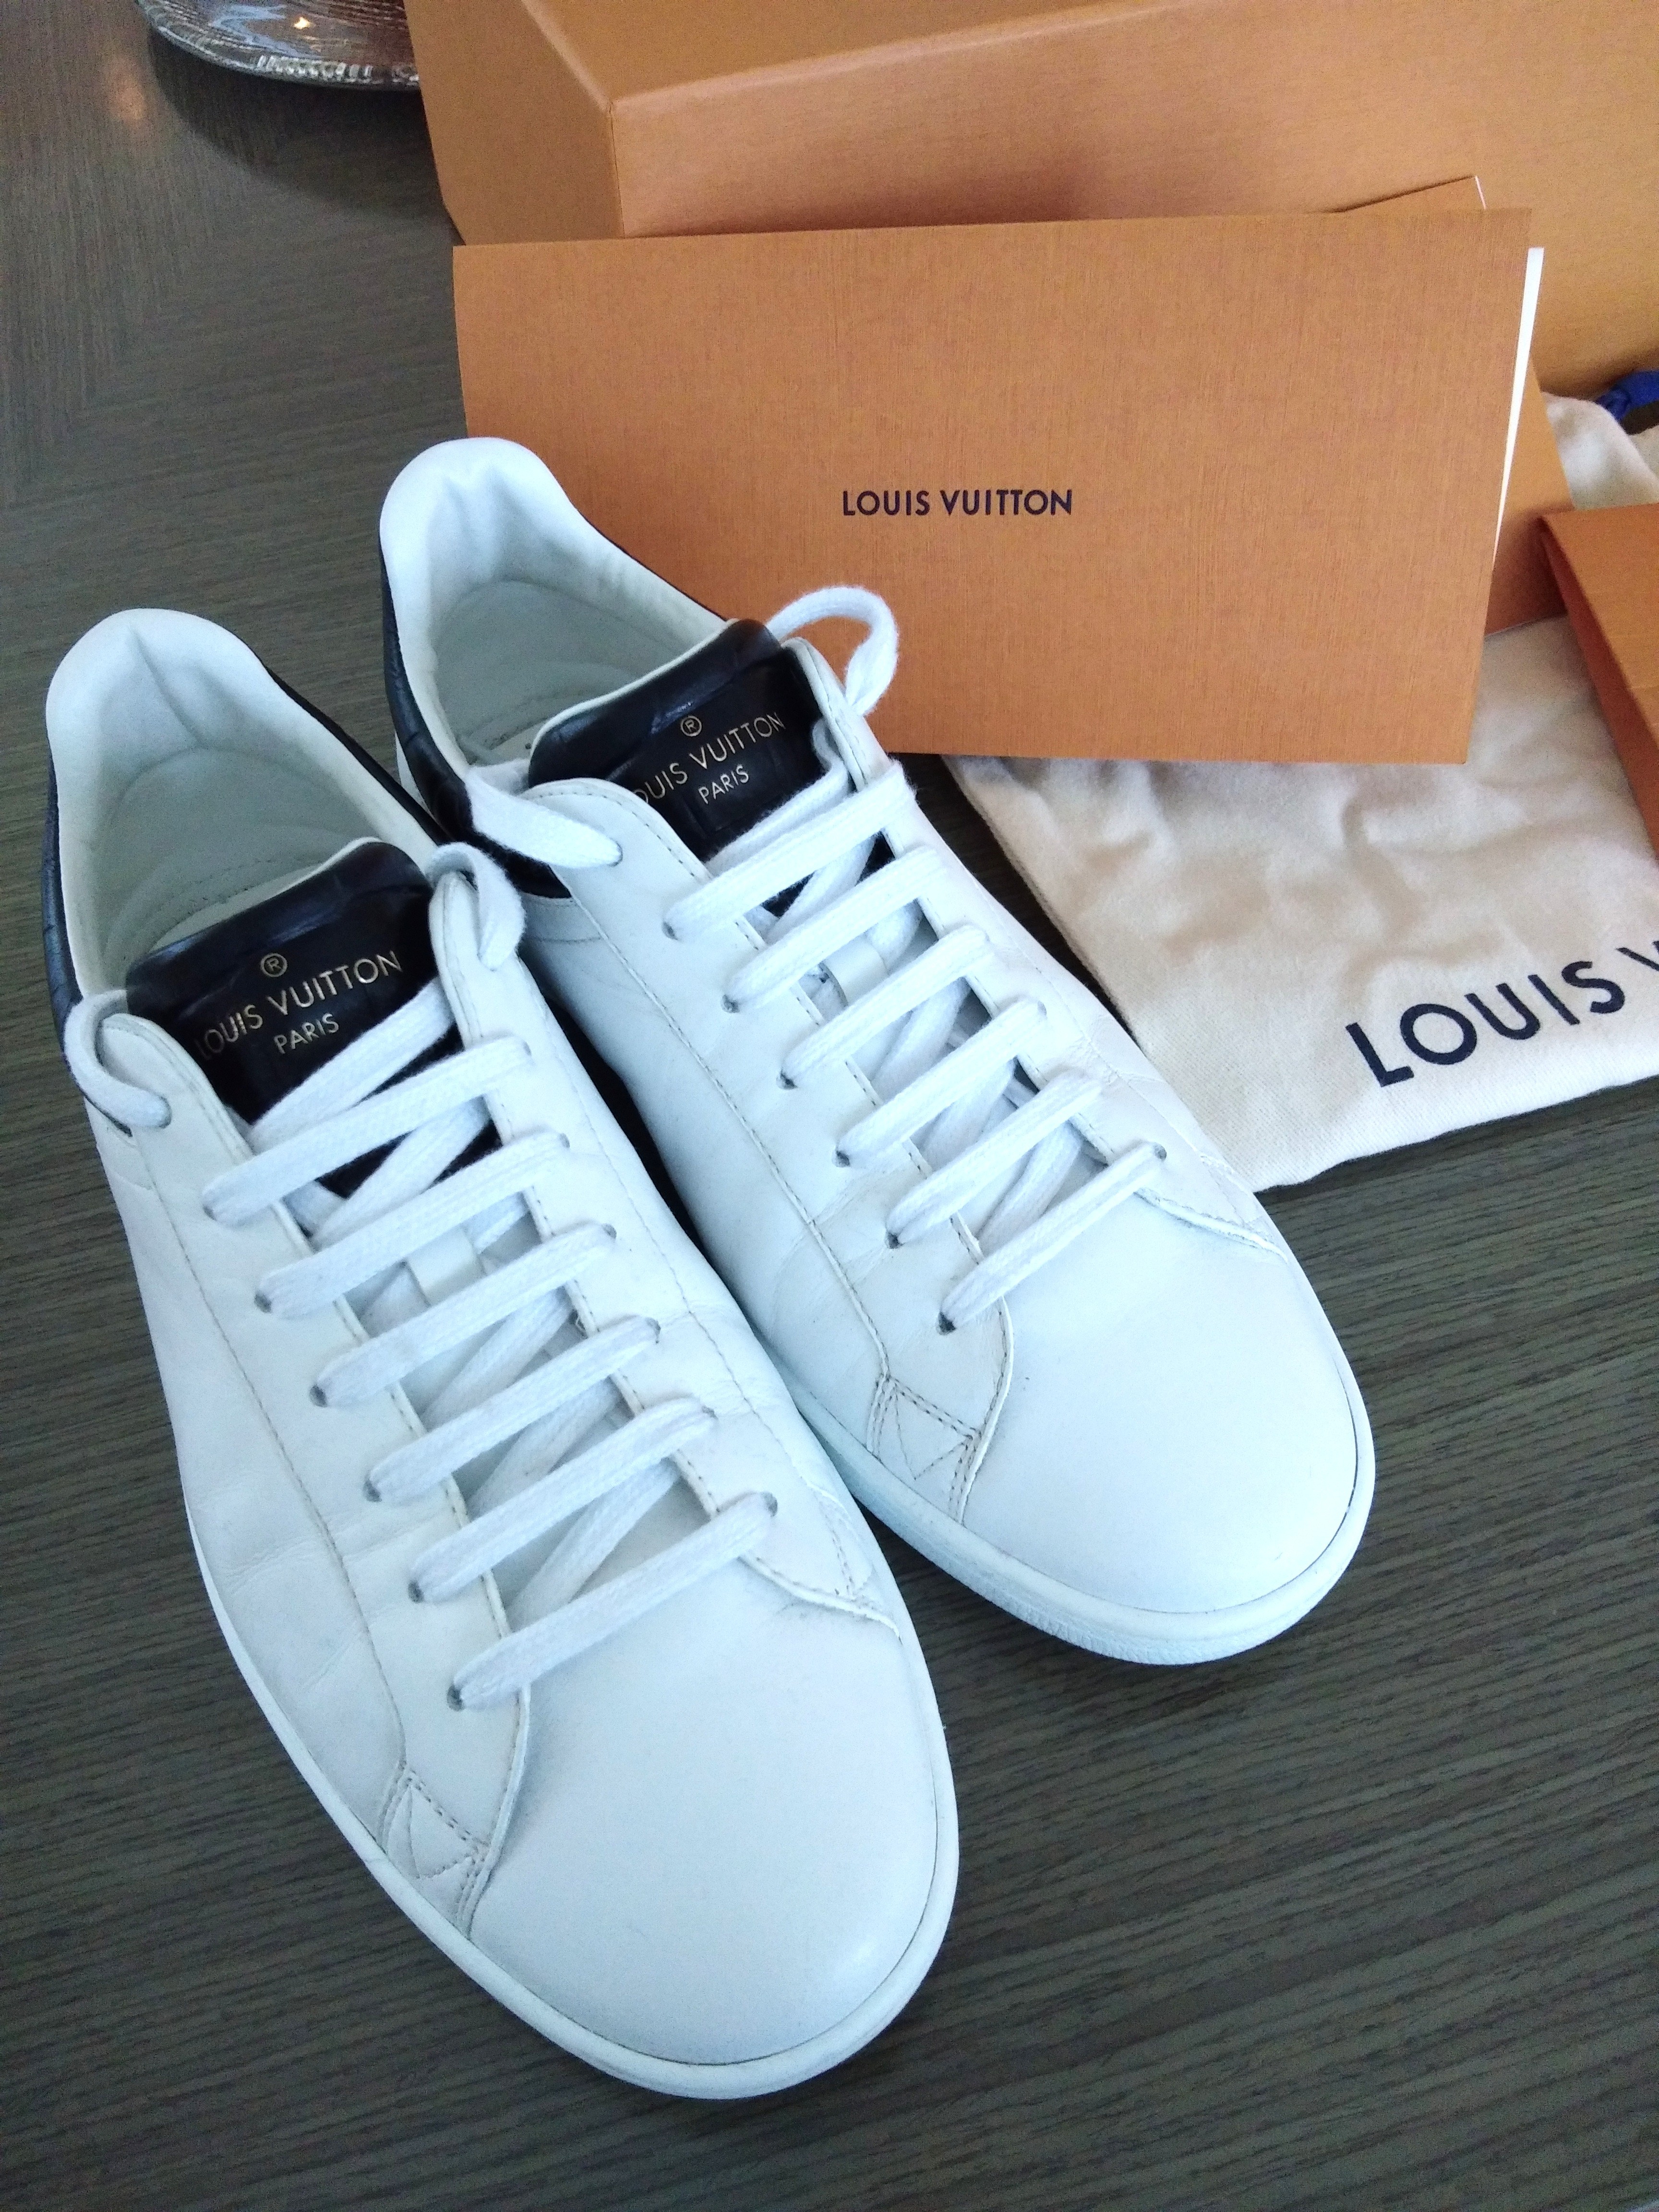 Louis Vuitton Pre-Loved Luxembourg sneakers for Men - Brown in KSA